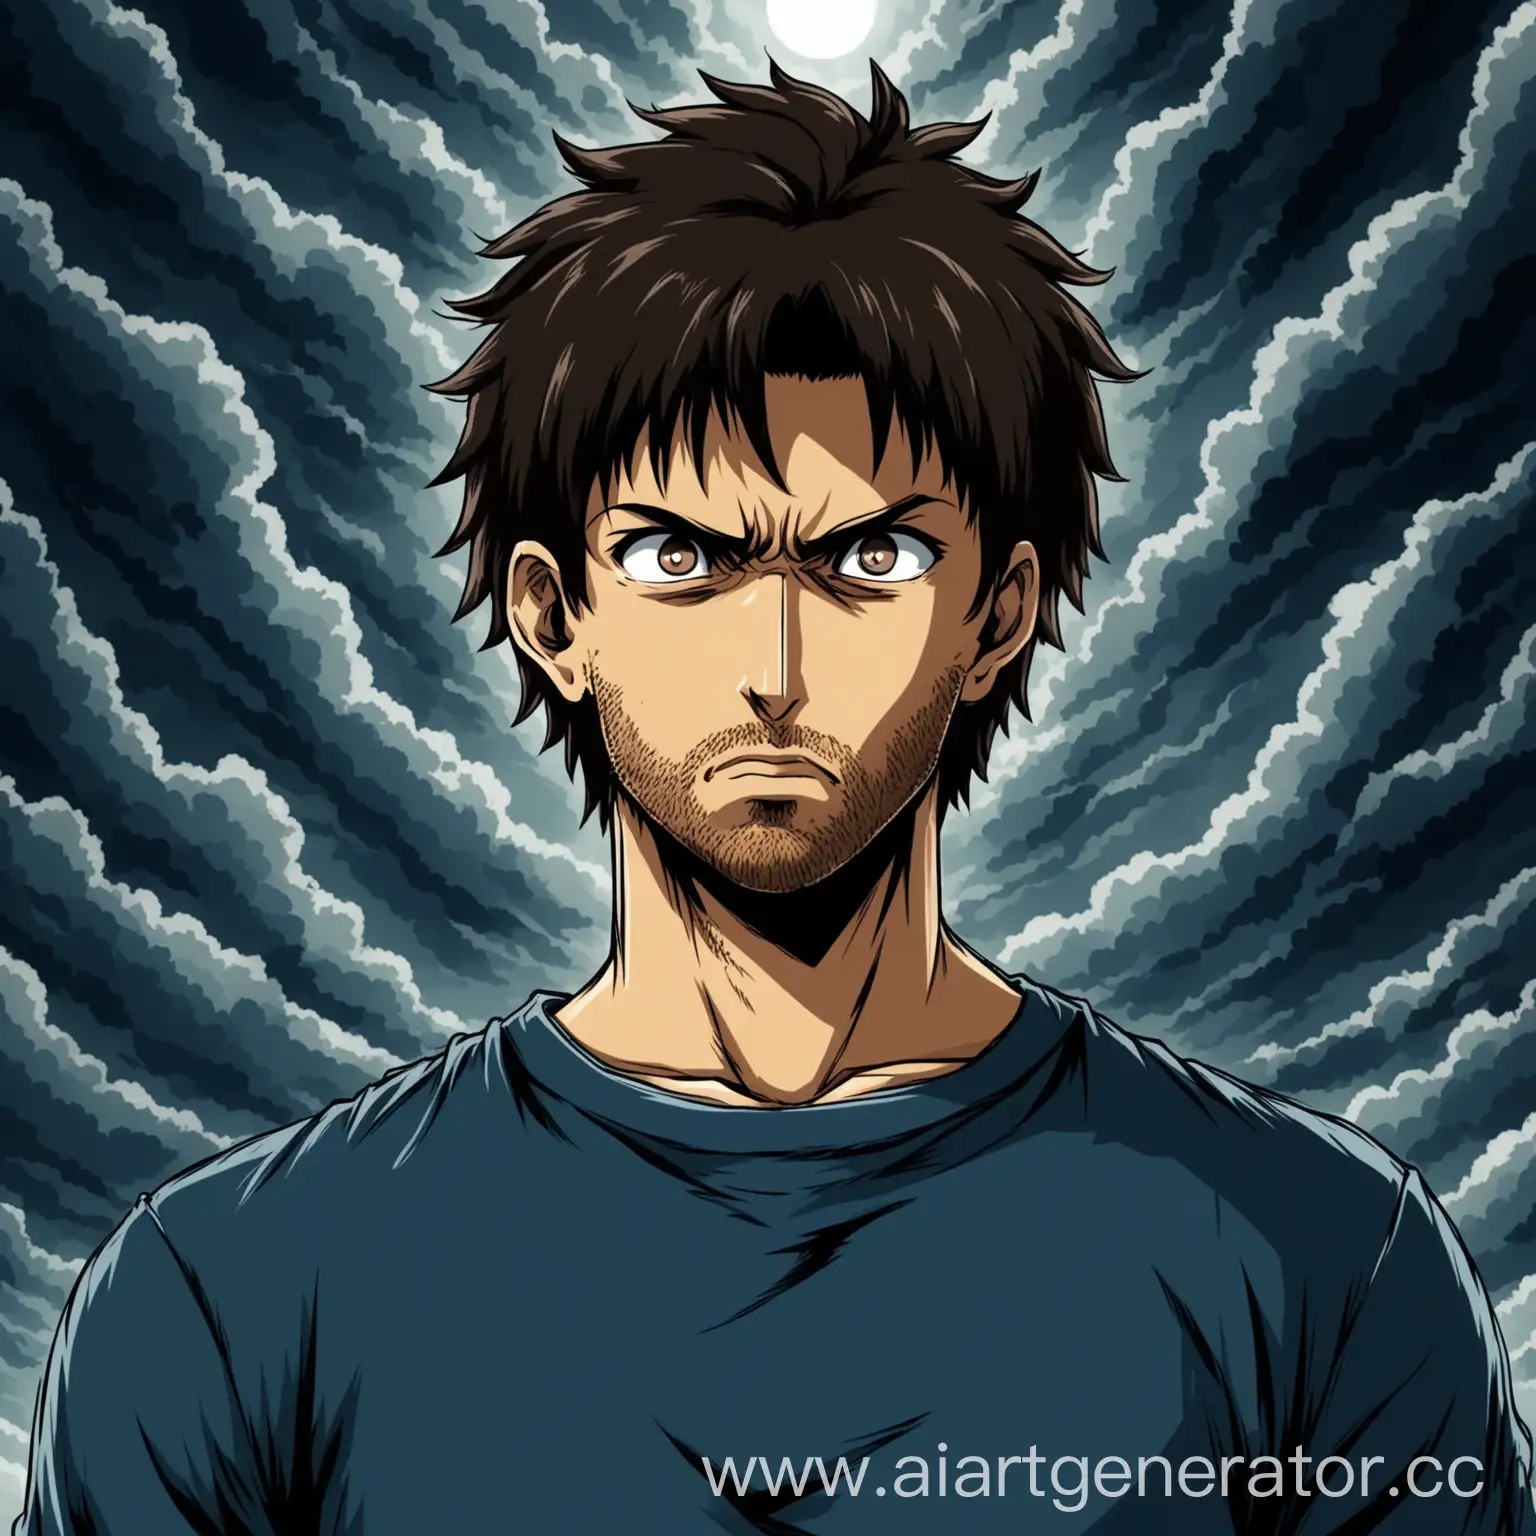 Anime-Style-Man-with-Blade-Fighting-Demons-Against-Cloudy-Background